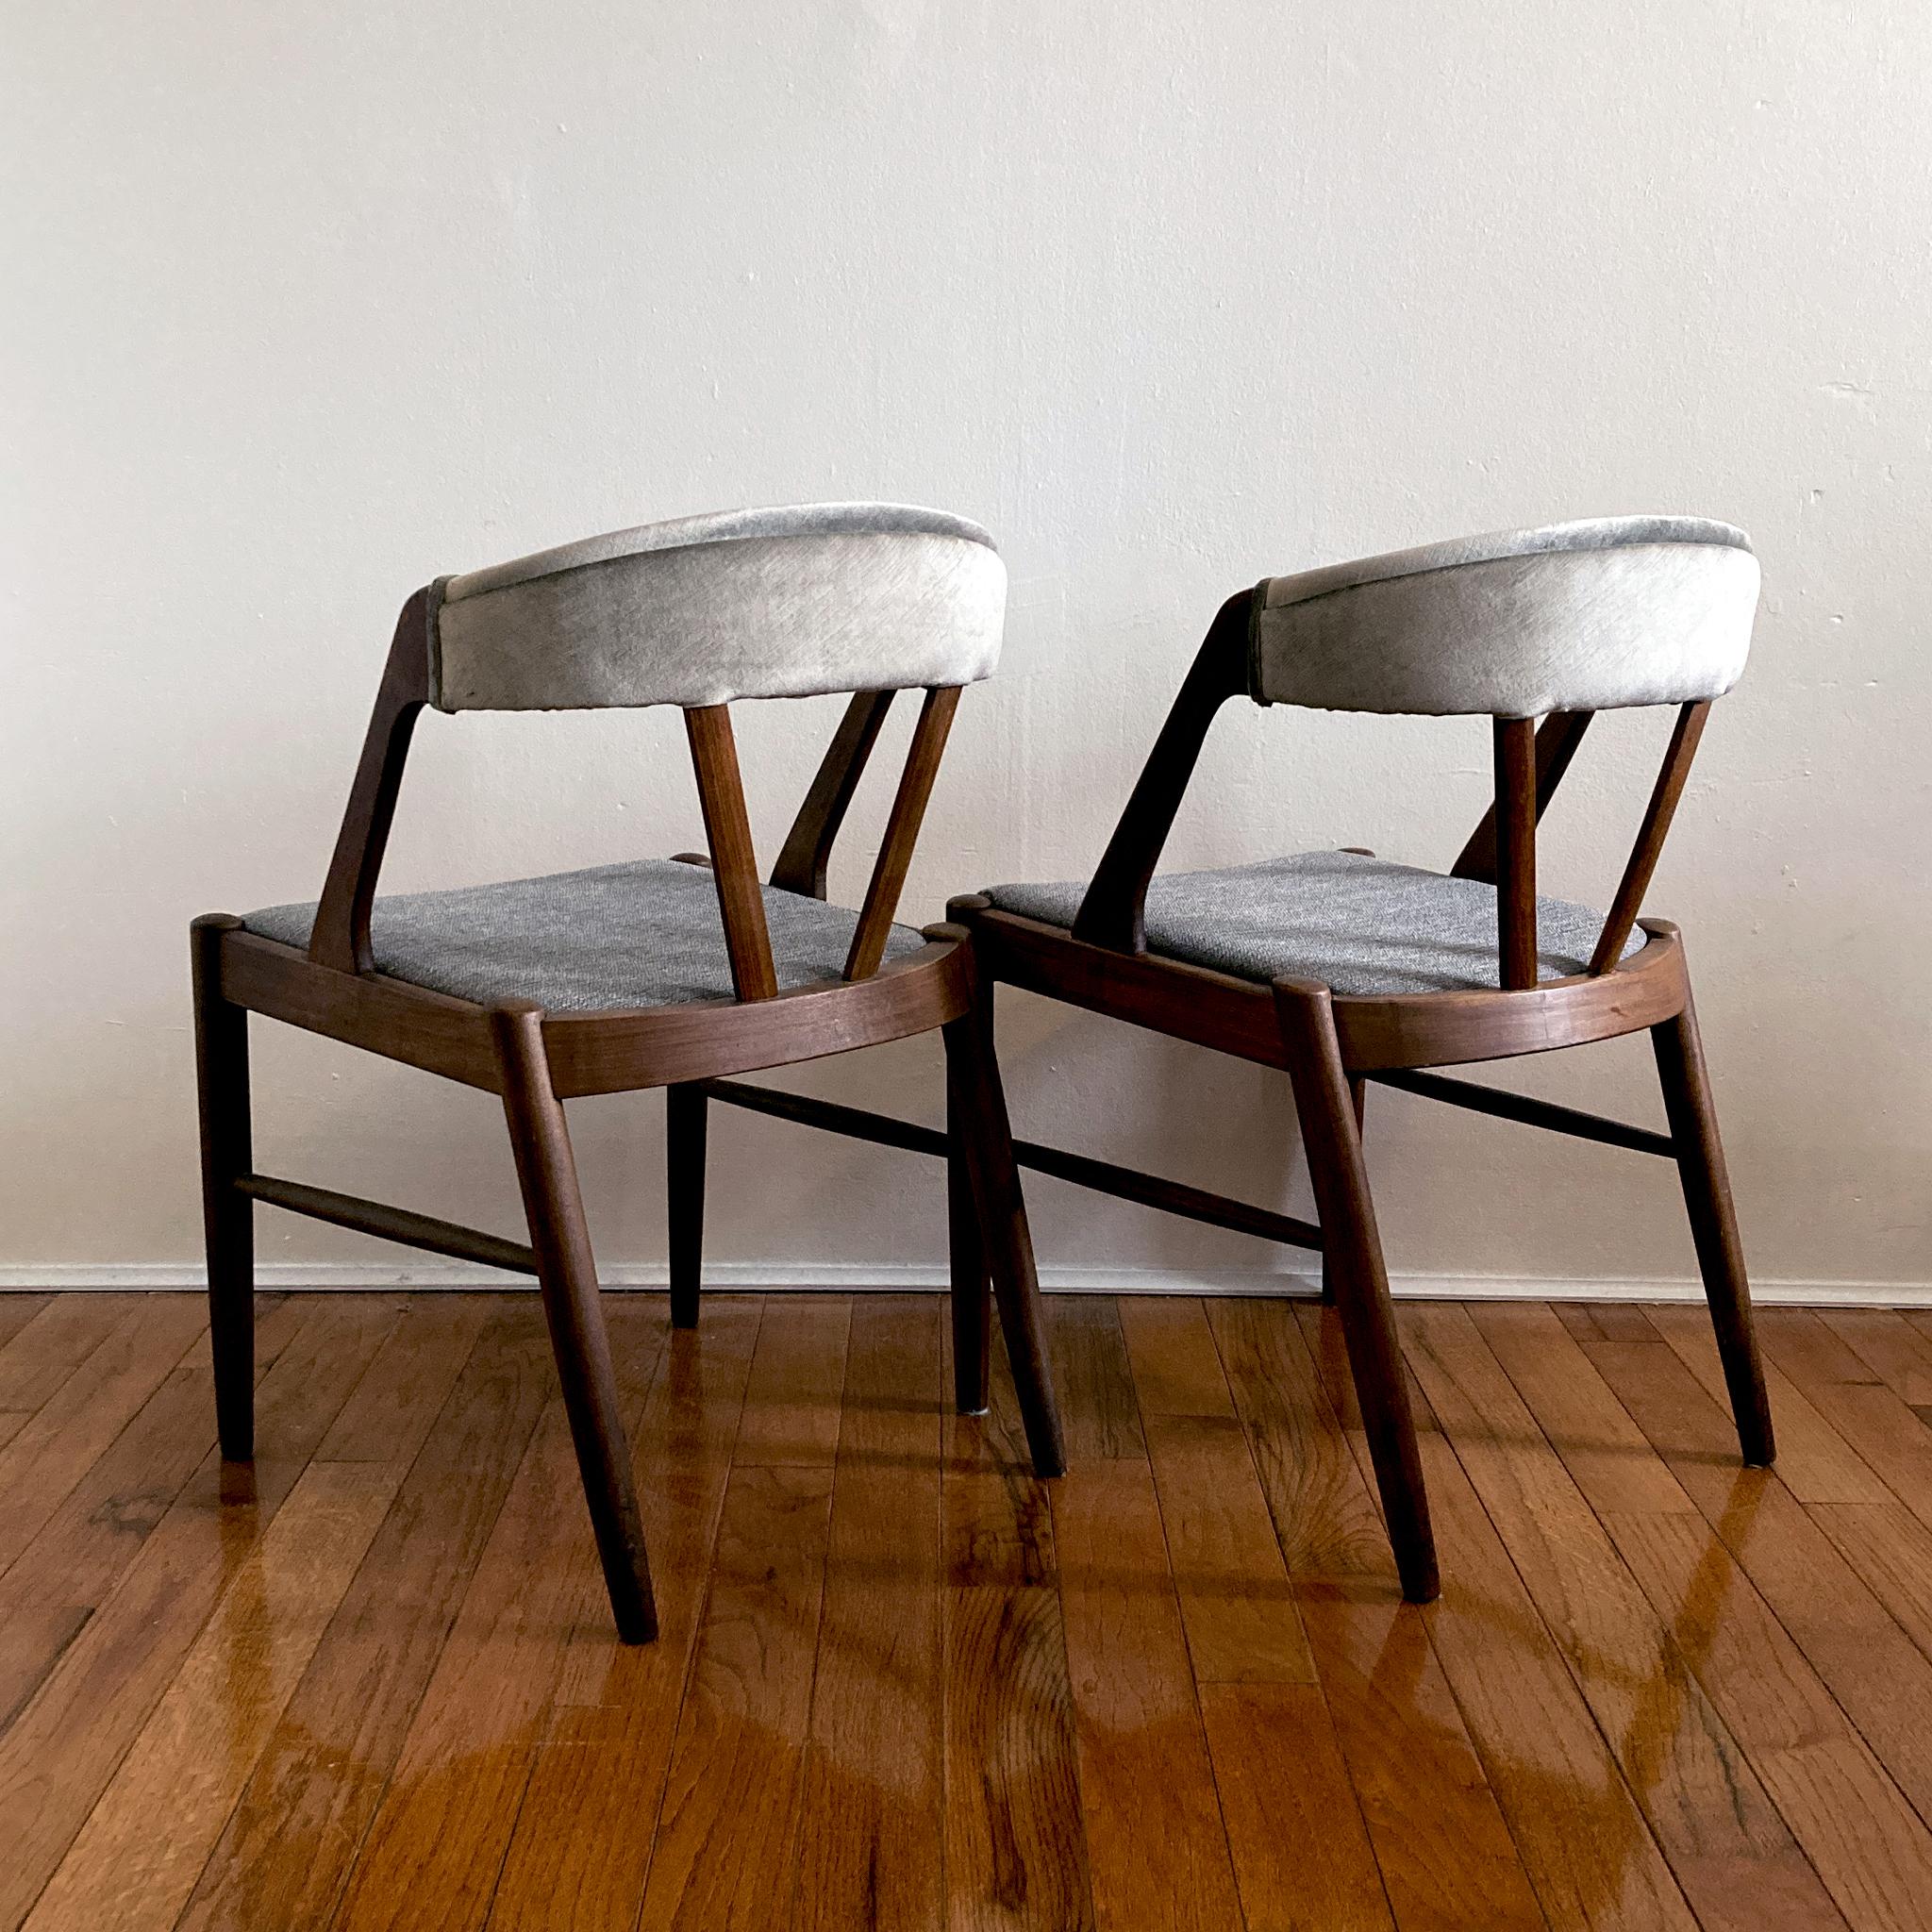 Danish Kai Kristiansen Style Reupholstered Curved Back Gray Chairs, 1960s, Pair of Two For Sale